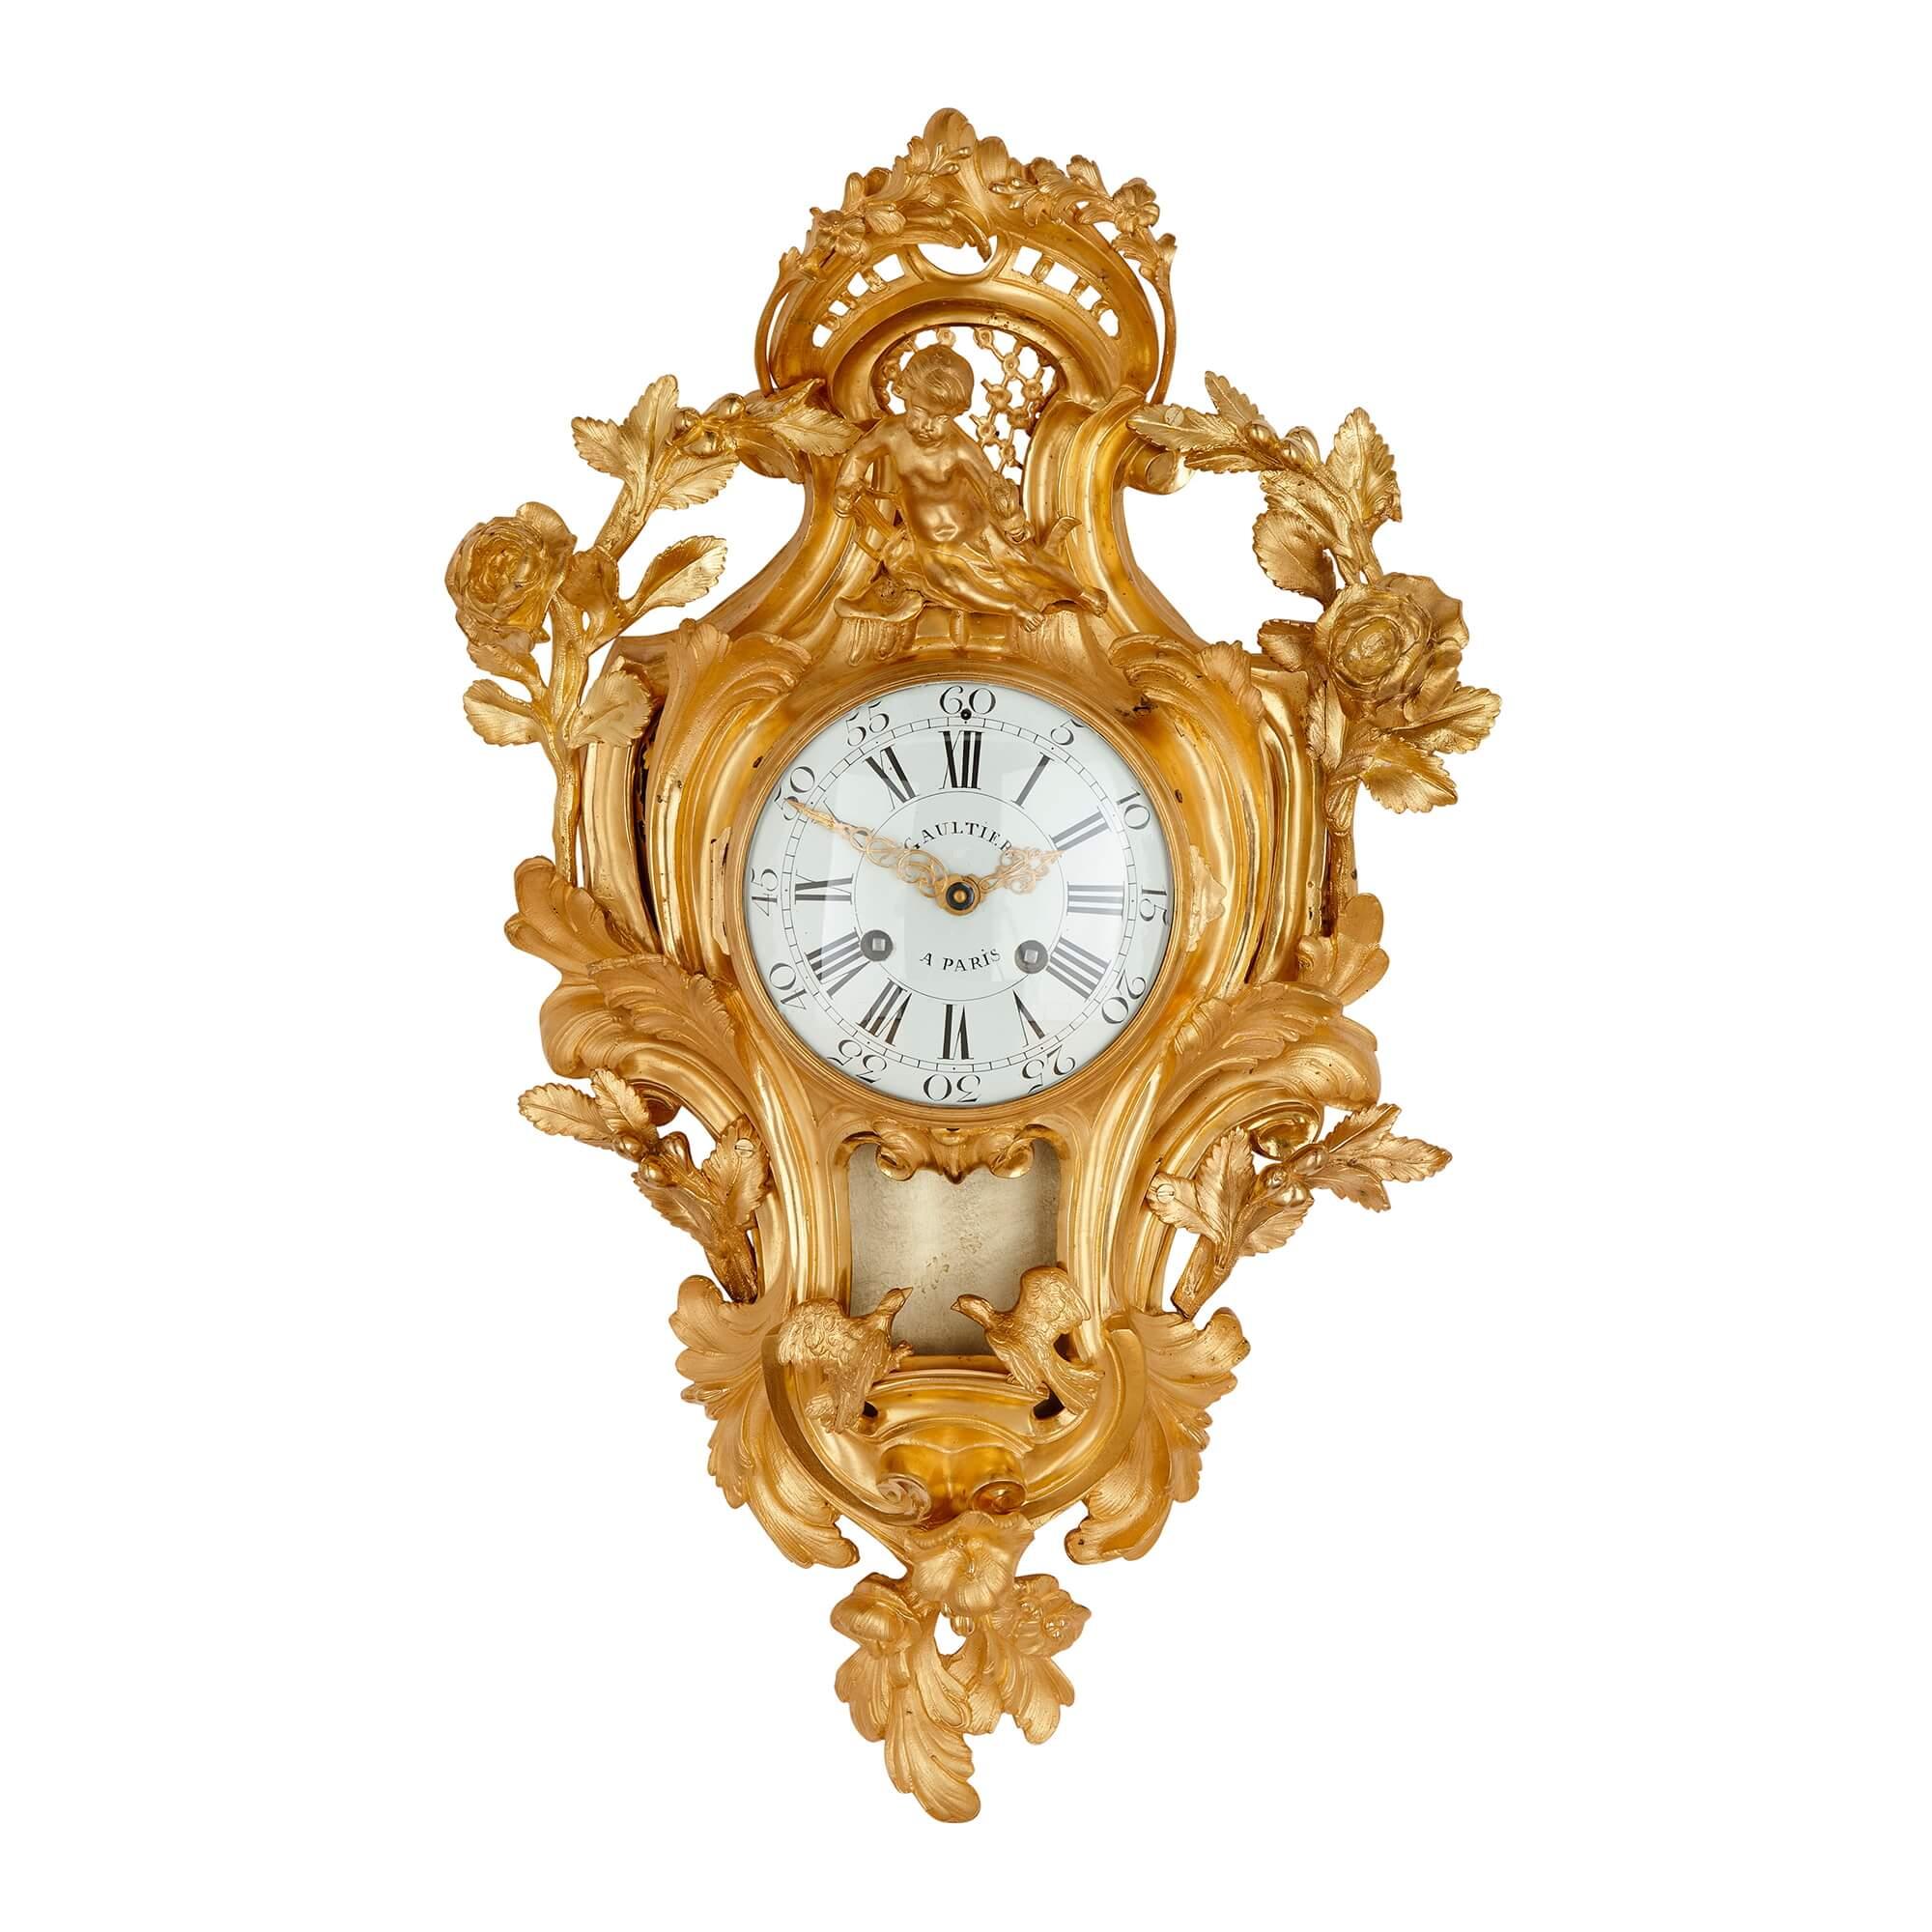 In their elaborate use of C-scrolls, putti figures, stylised acanthus leaves and flowers, this clock and barometer are clearly Rococo in their style. The Rococo came into fashion in France during the reign of King Louis XV (1710-74) and because of